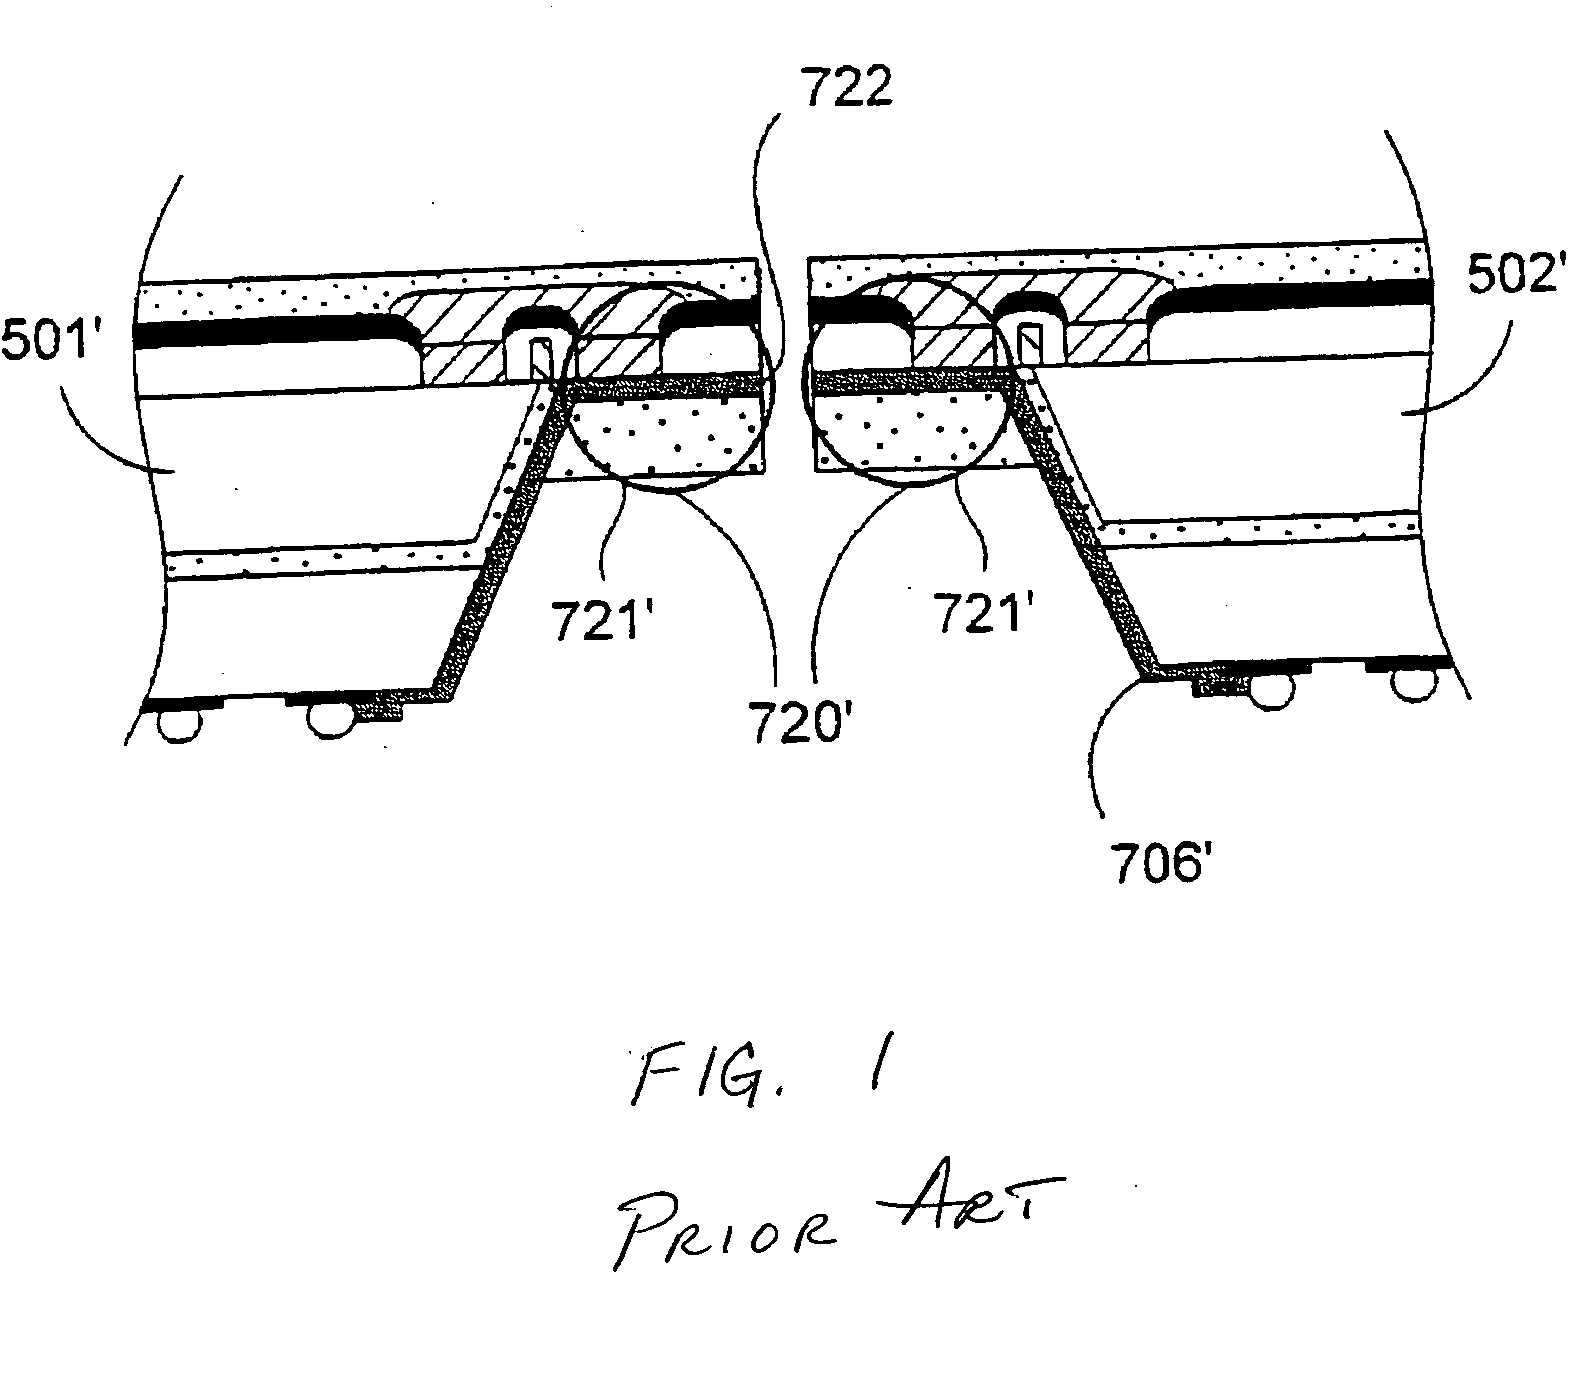 Through-wafer contact to bonding pad